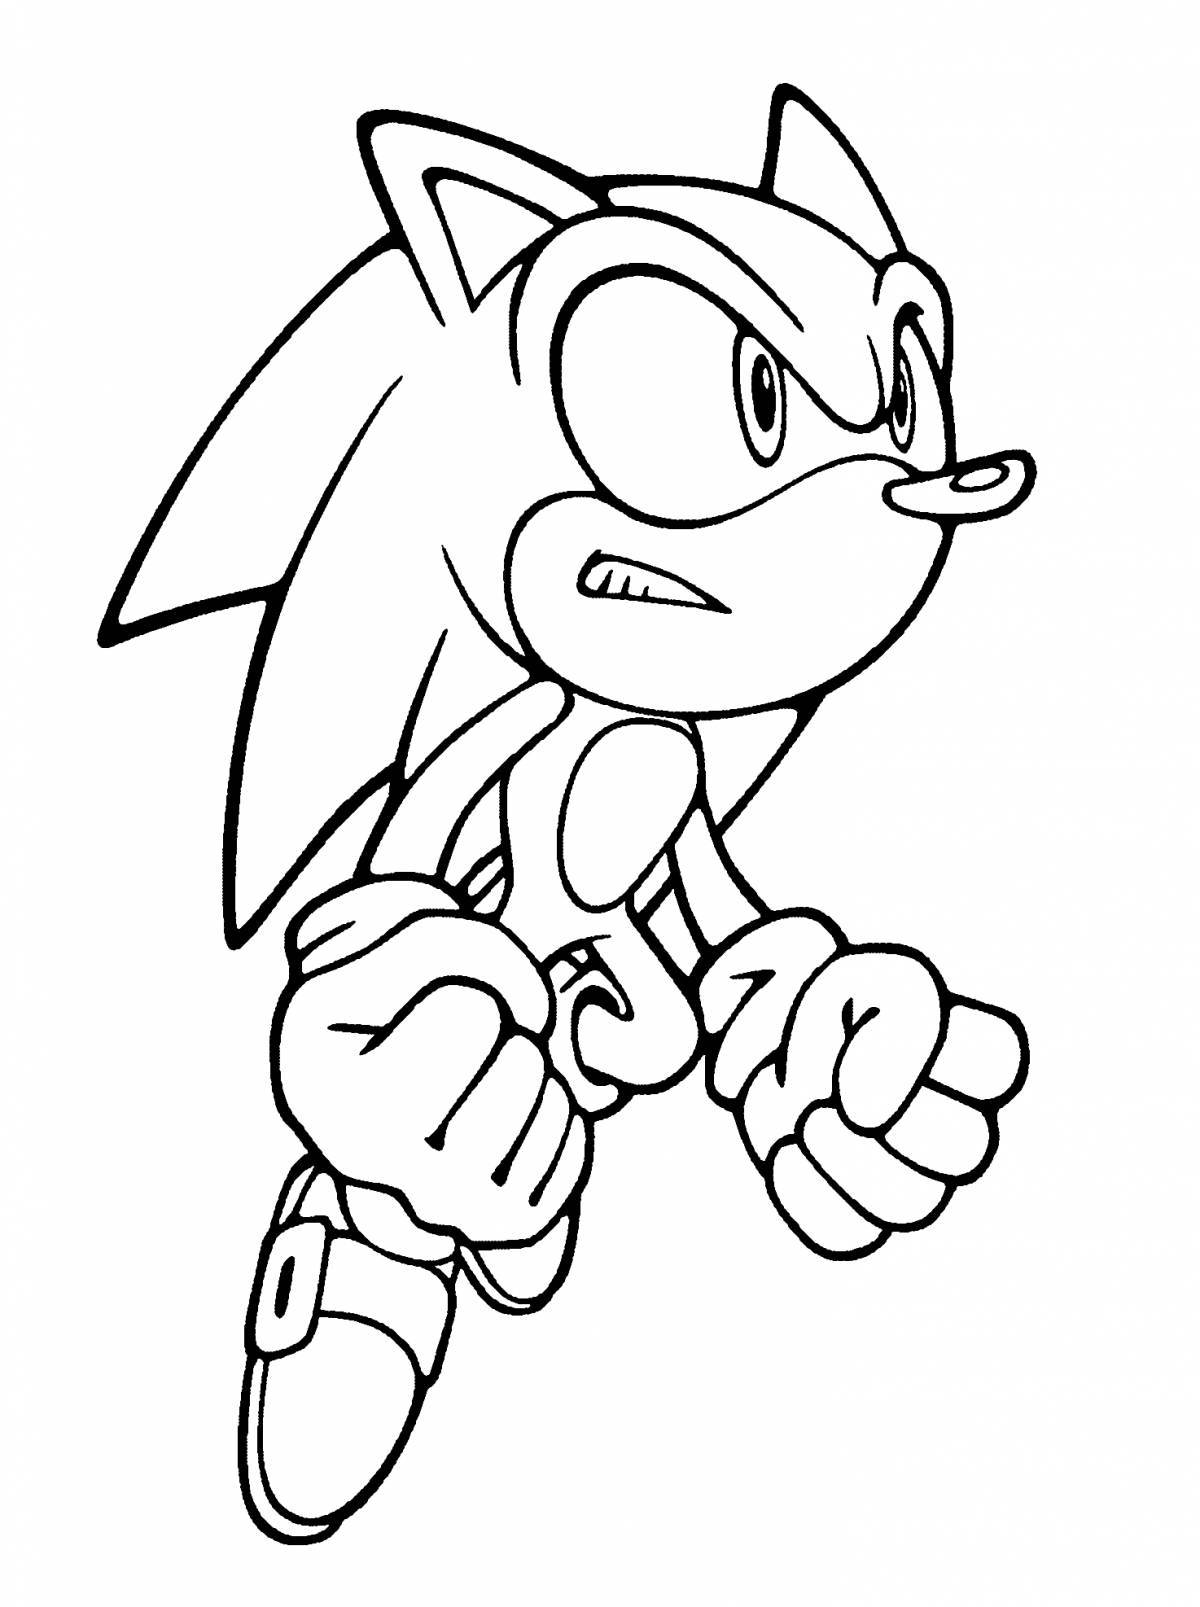 Amazing sonic coloring book for kids